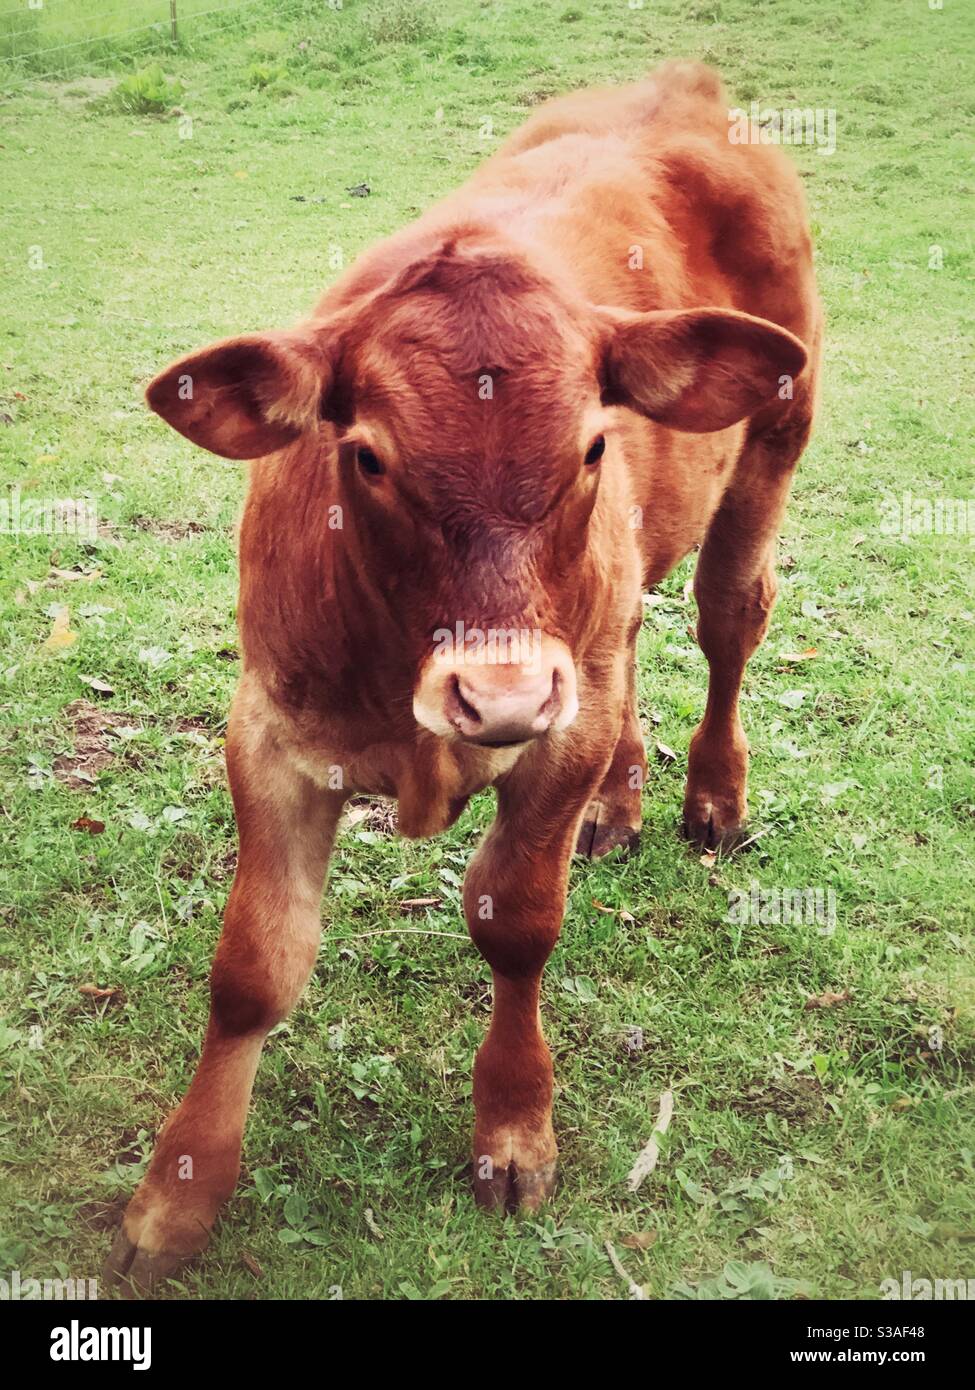 Portrait of a baby brown cow in a green field Stock Photo